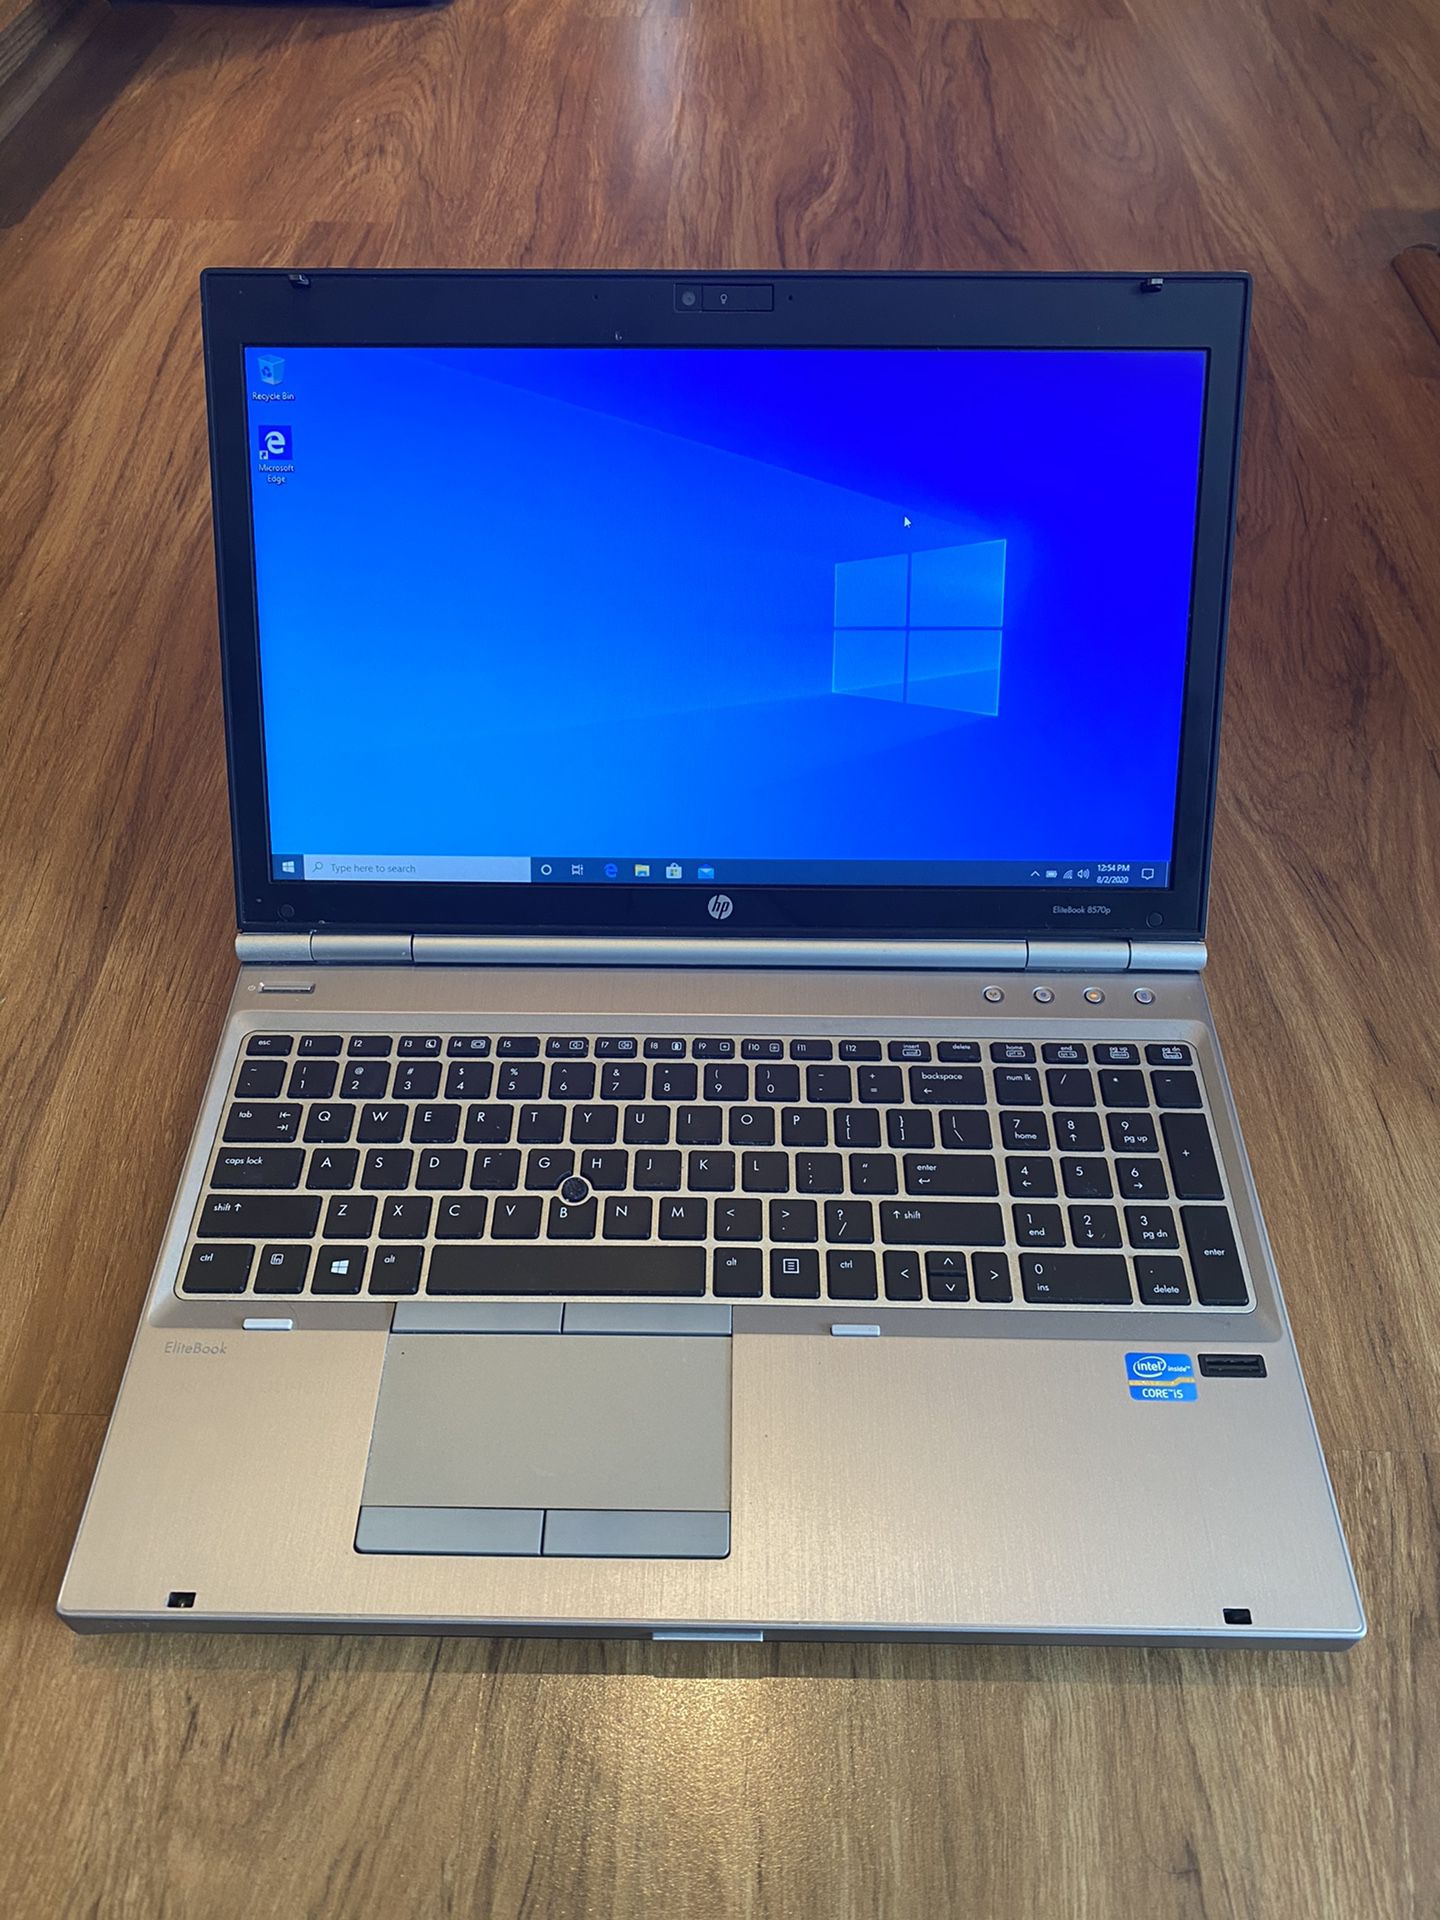 HP EliteBook 8470p core i5 3rd gen 8GB Ram 320GB Hard Drive 15.6 inch Screen Windows 10 Pro Laptop with charger in Excellent Working condition!!!